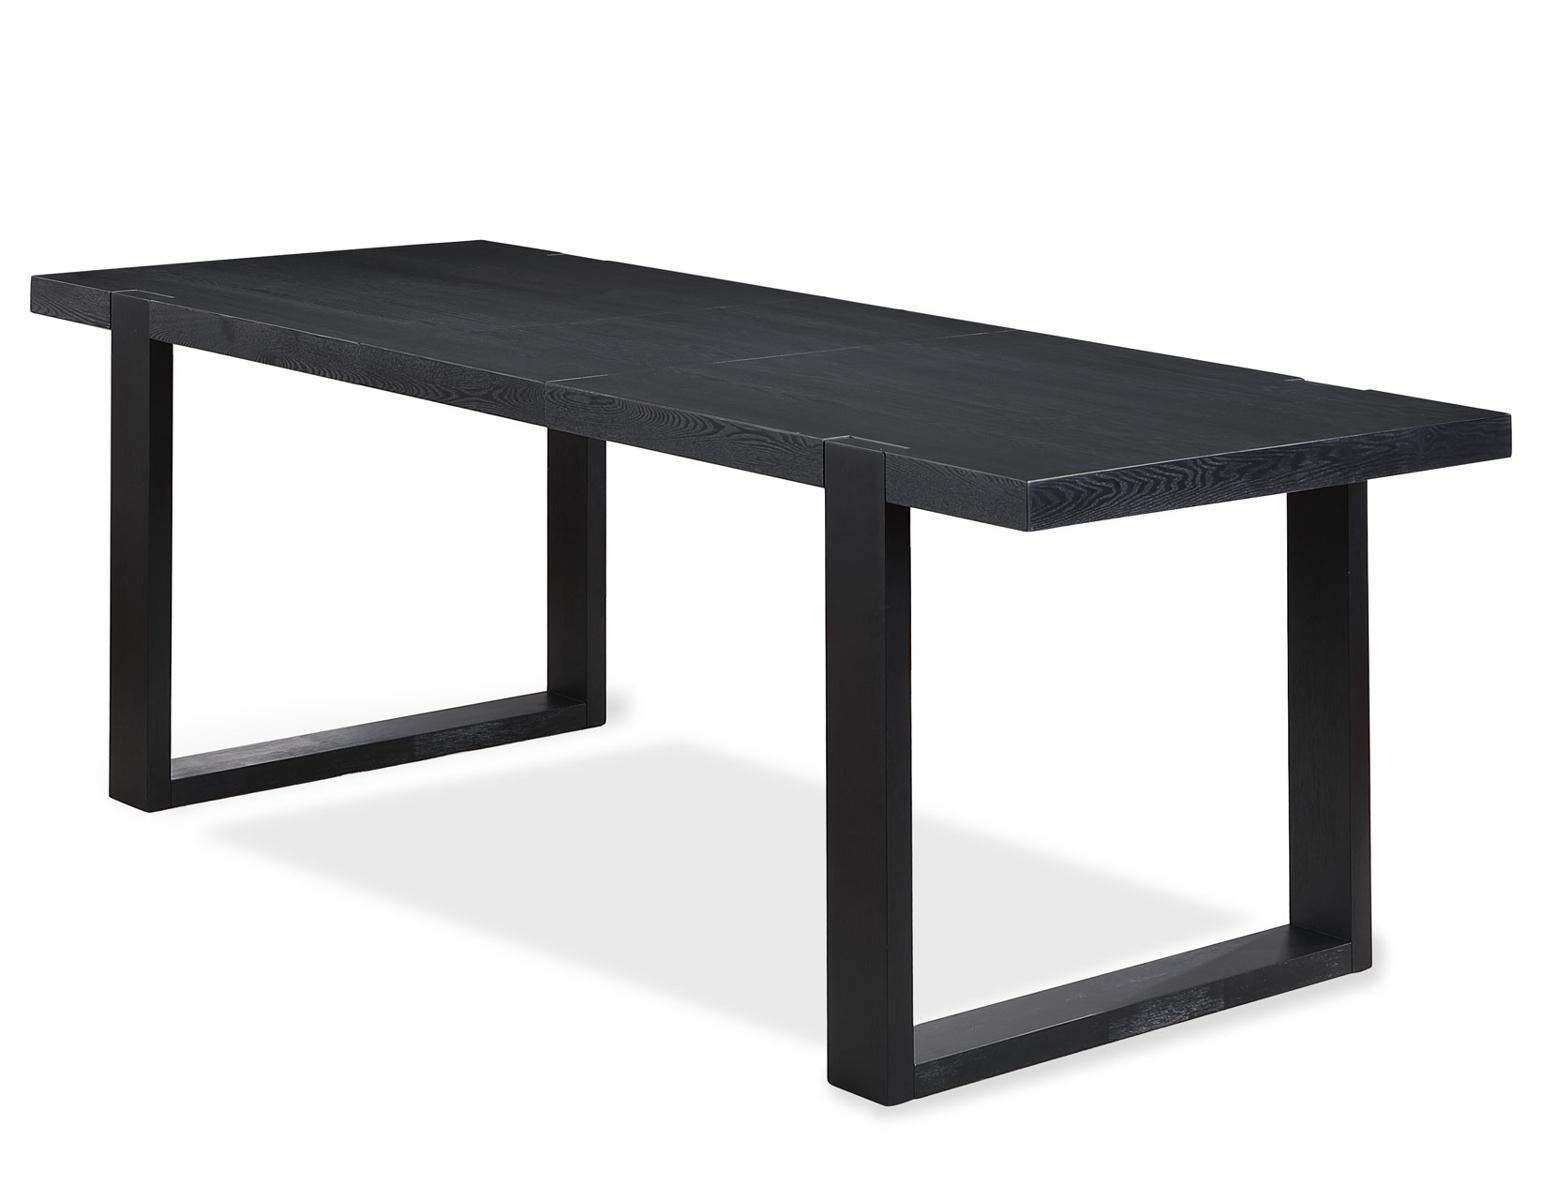 Steve Silver Yves Counter Table in Rubbed Charcoal image